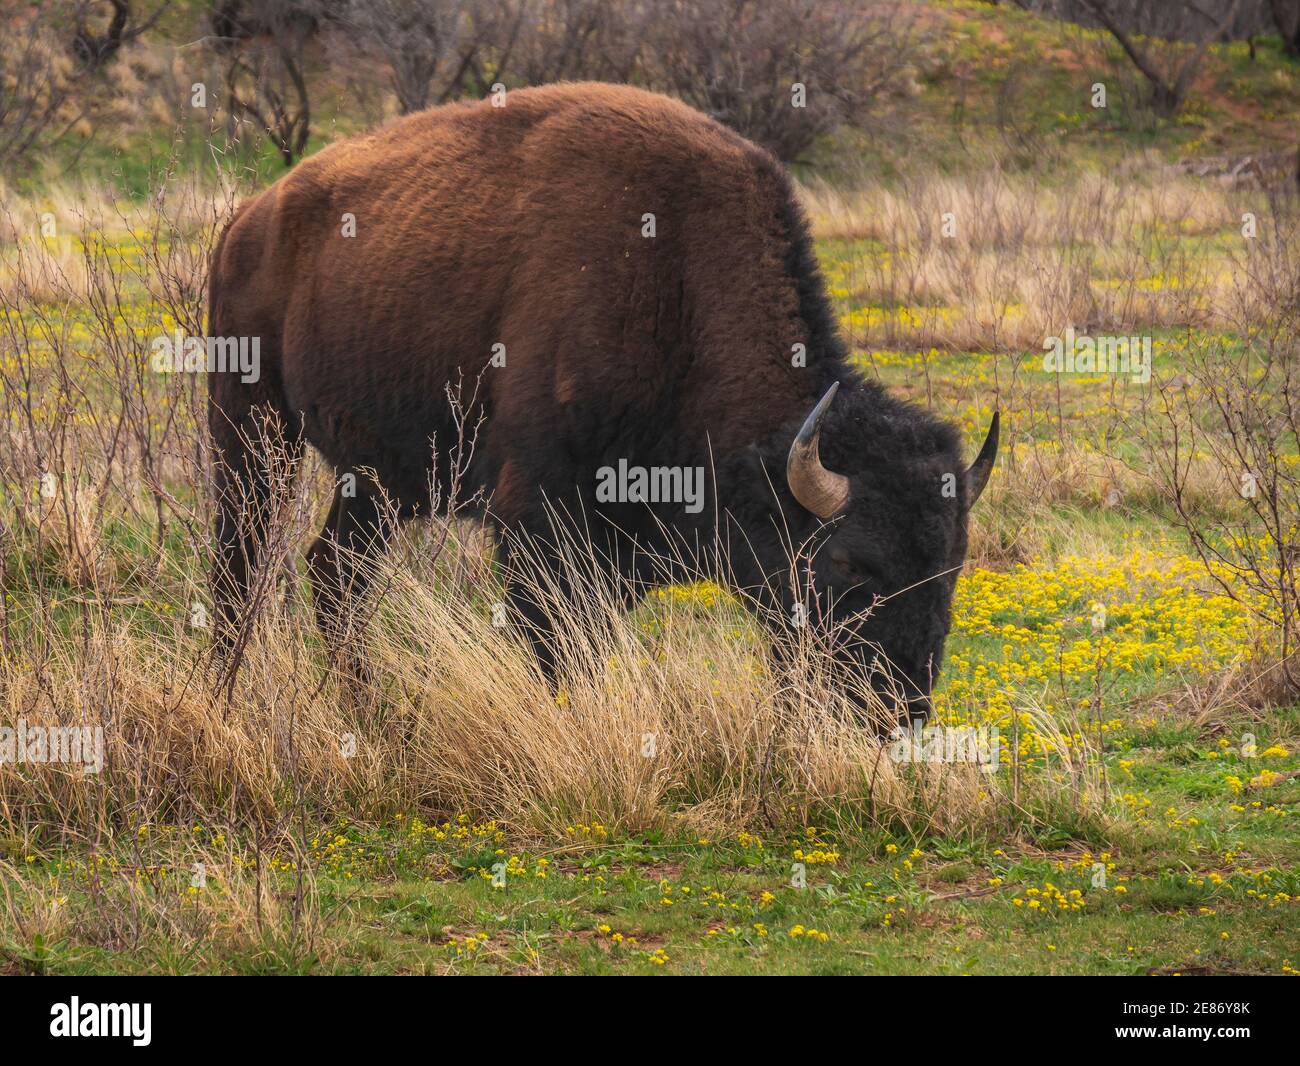 Bison in Honey Flat Campground, Texas State Bison Herd, Caprock Canyons State Park, Quitaque, Texas. Stock Photo